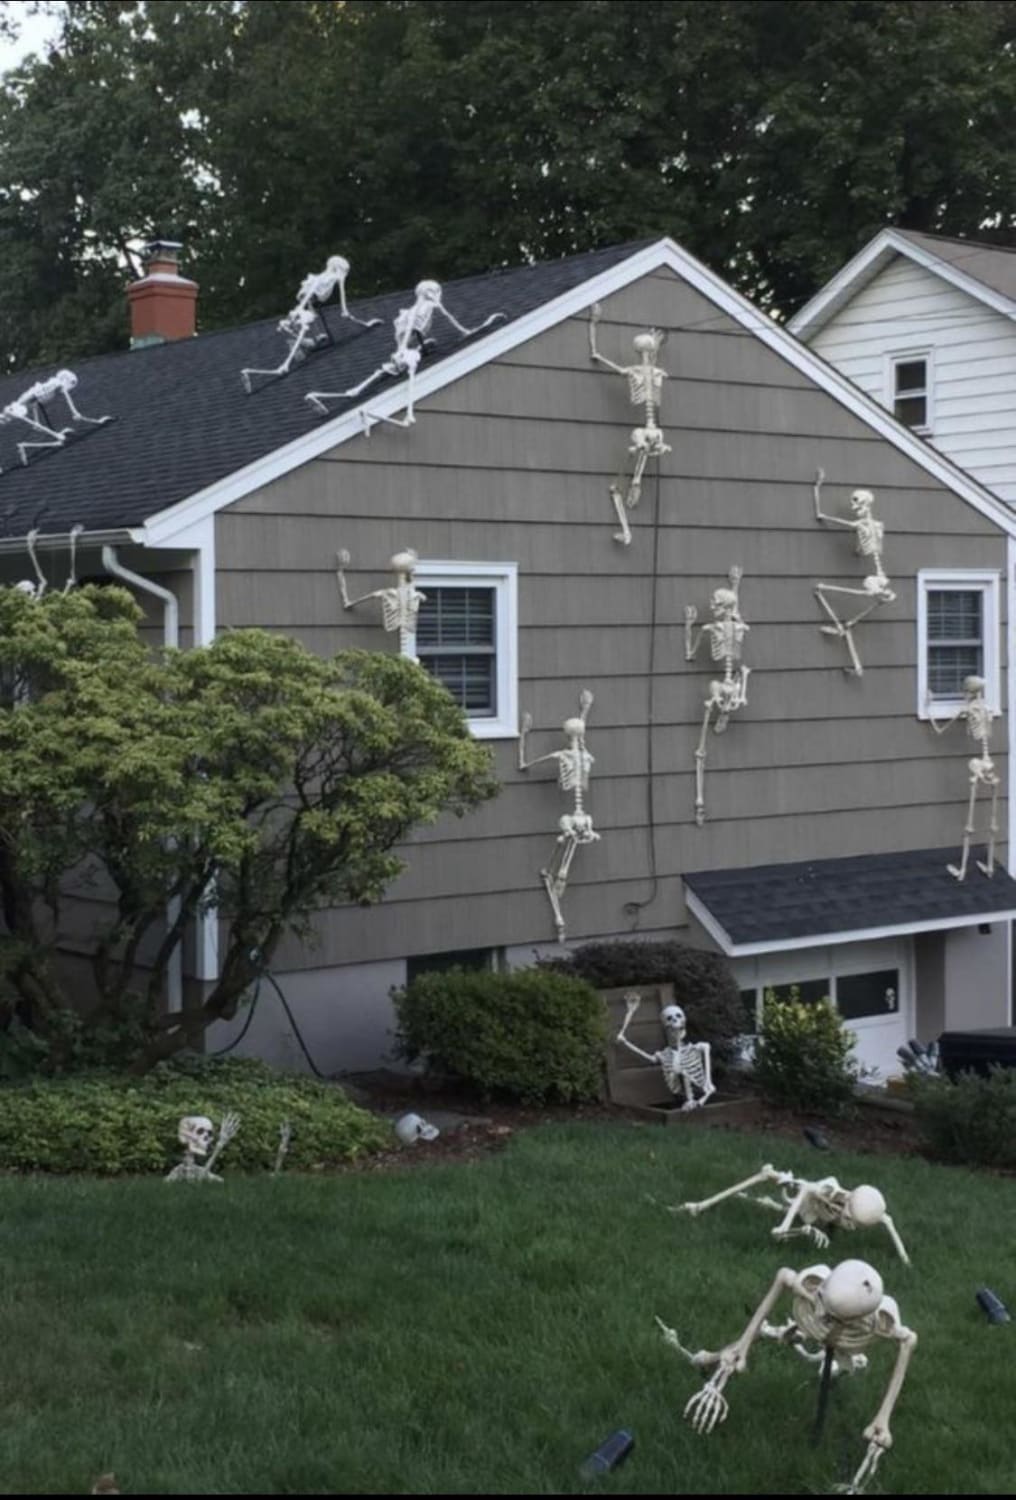 This houses Halloween decorations.